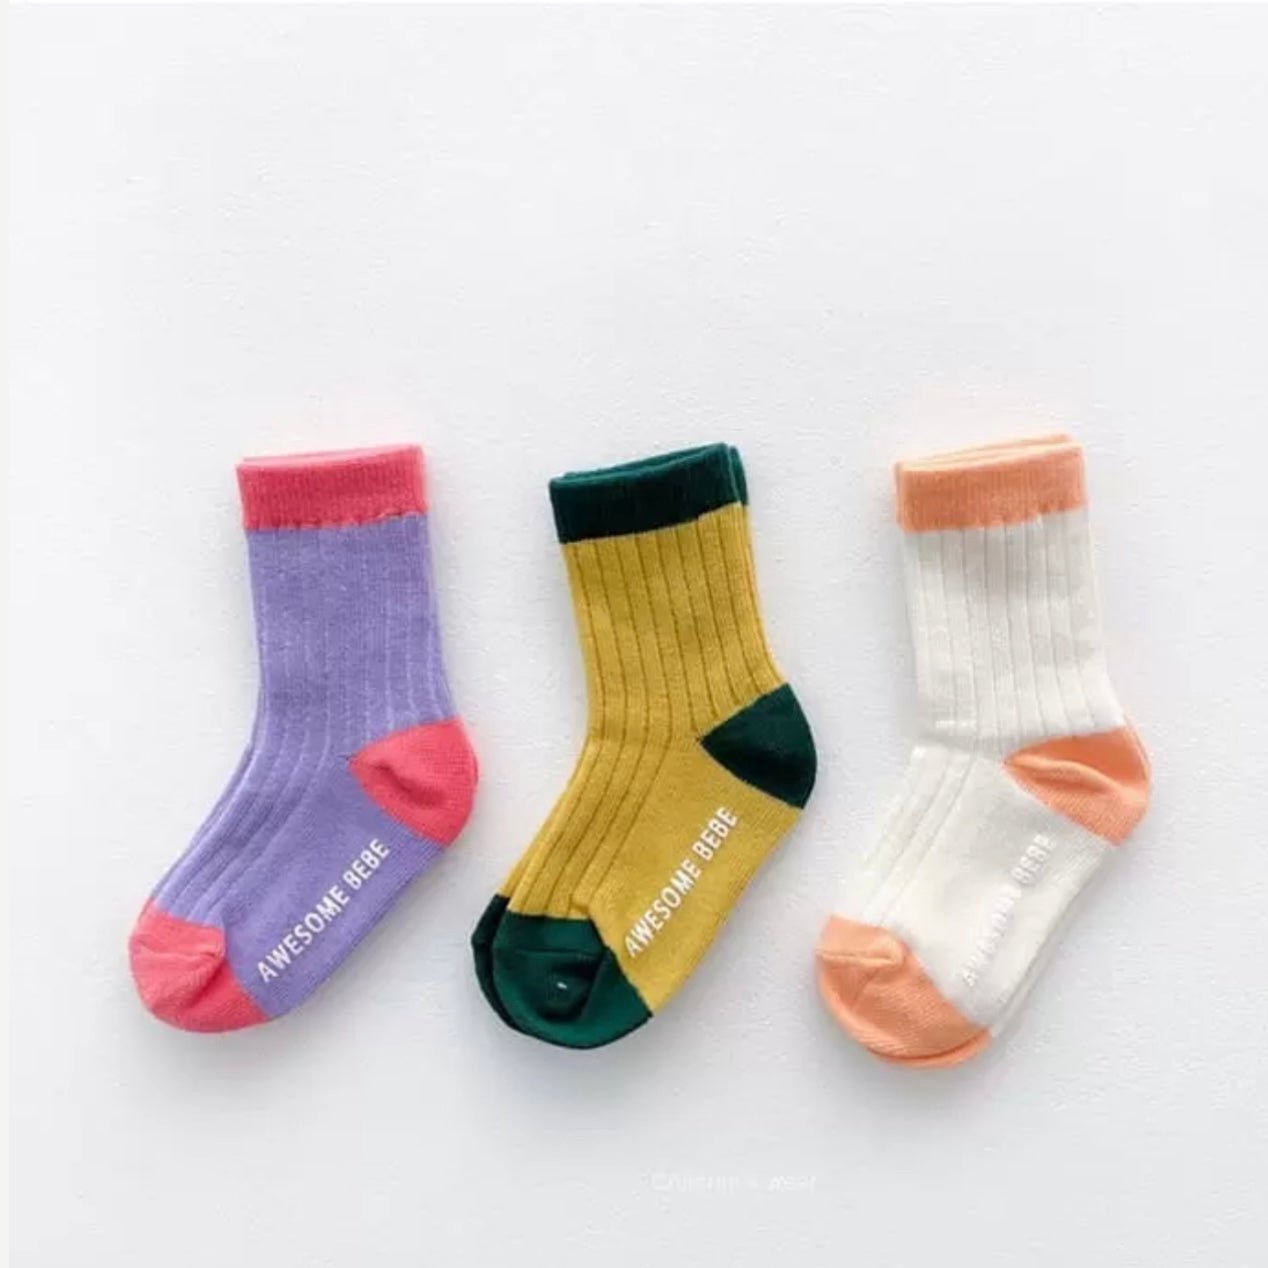 Pastel Socks Set find Stylish Fashion for Little People- at Little Foxx Concept Store